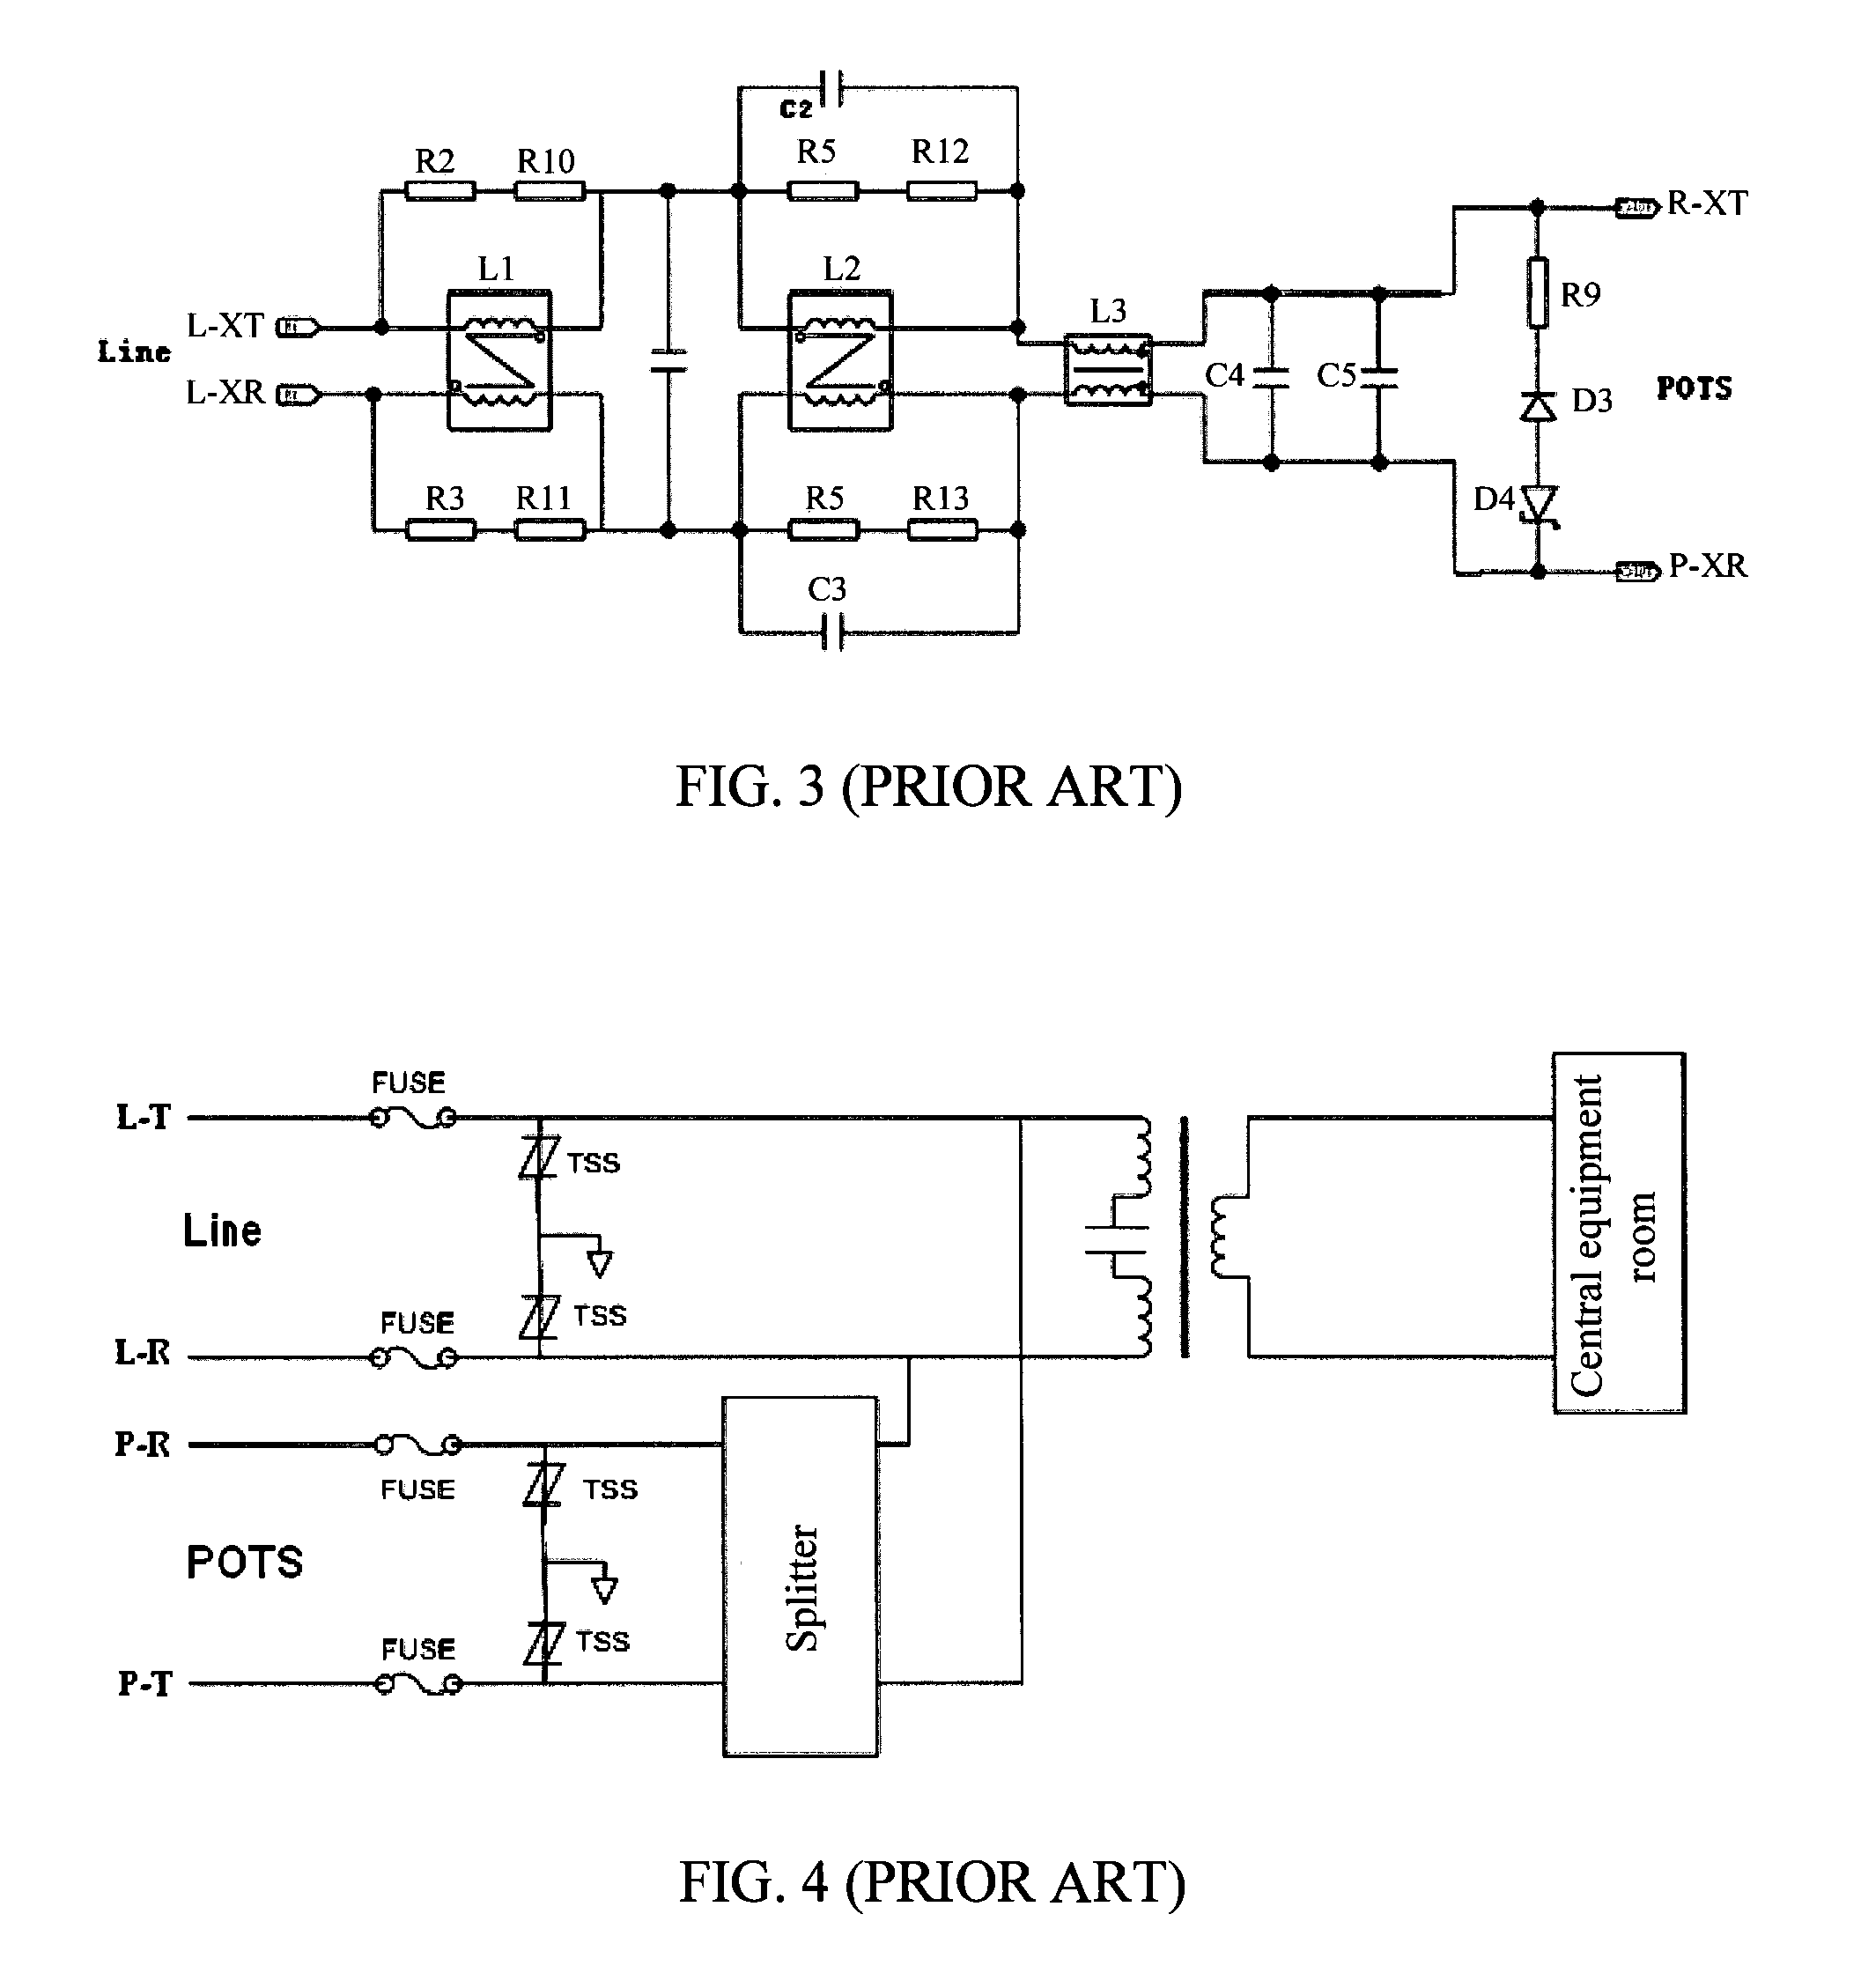 DSL protection circuit